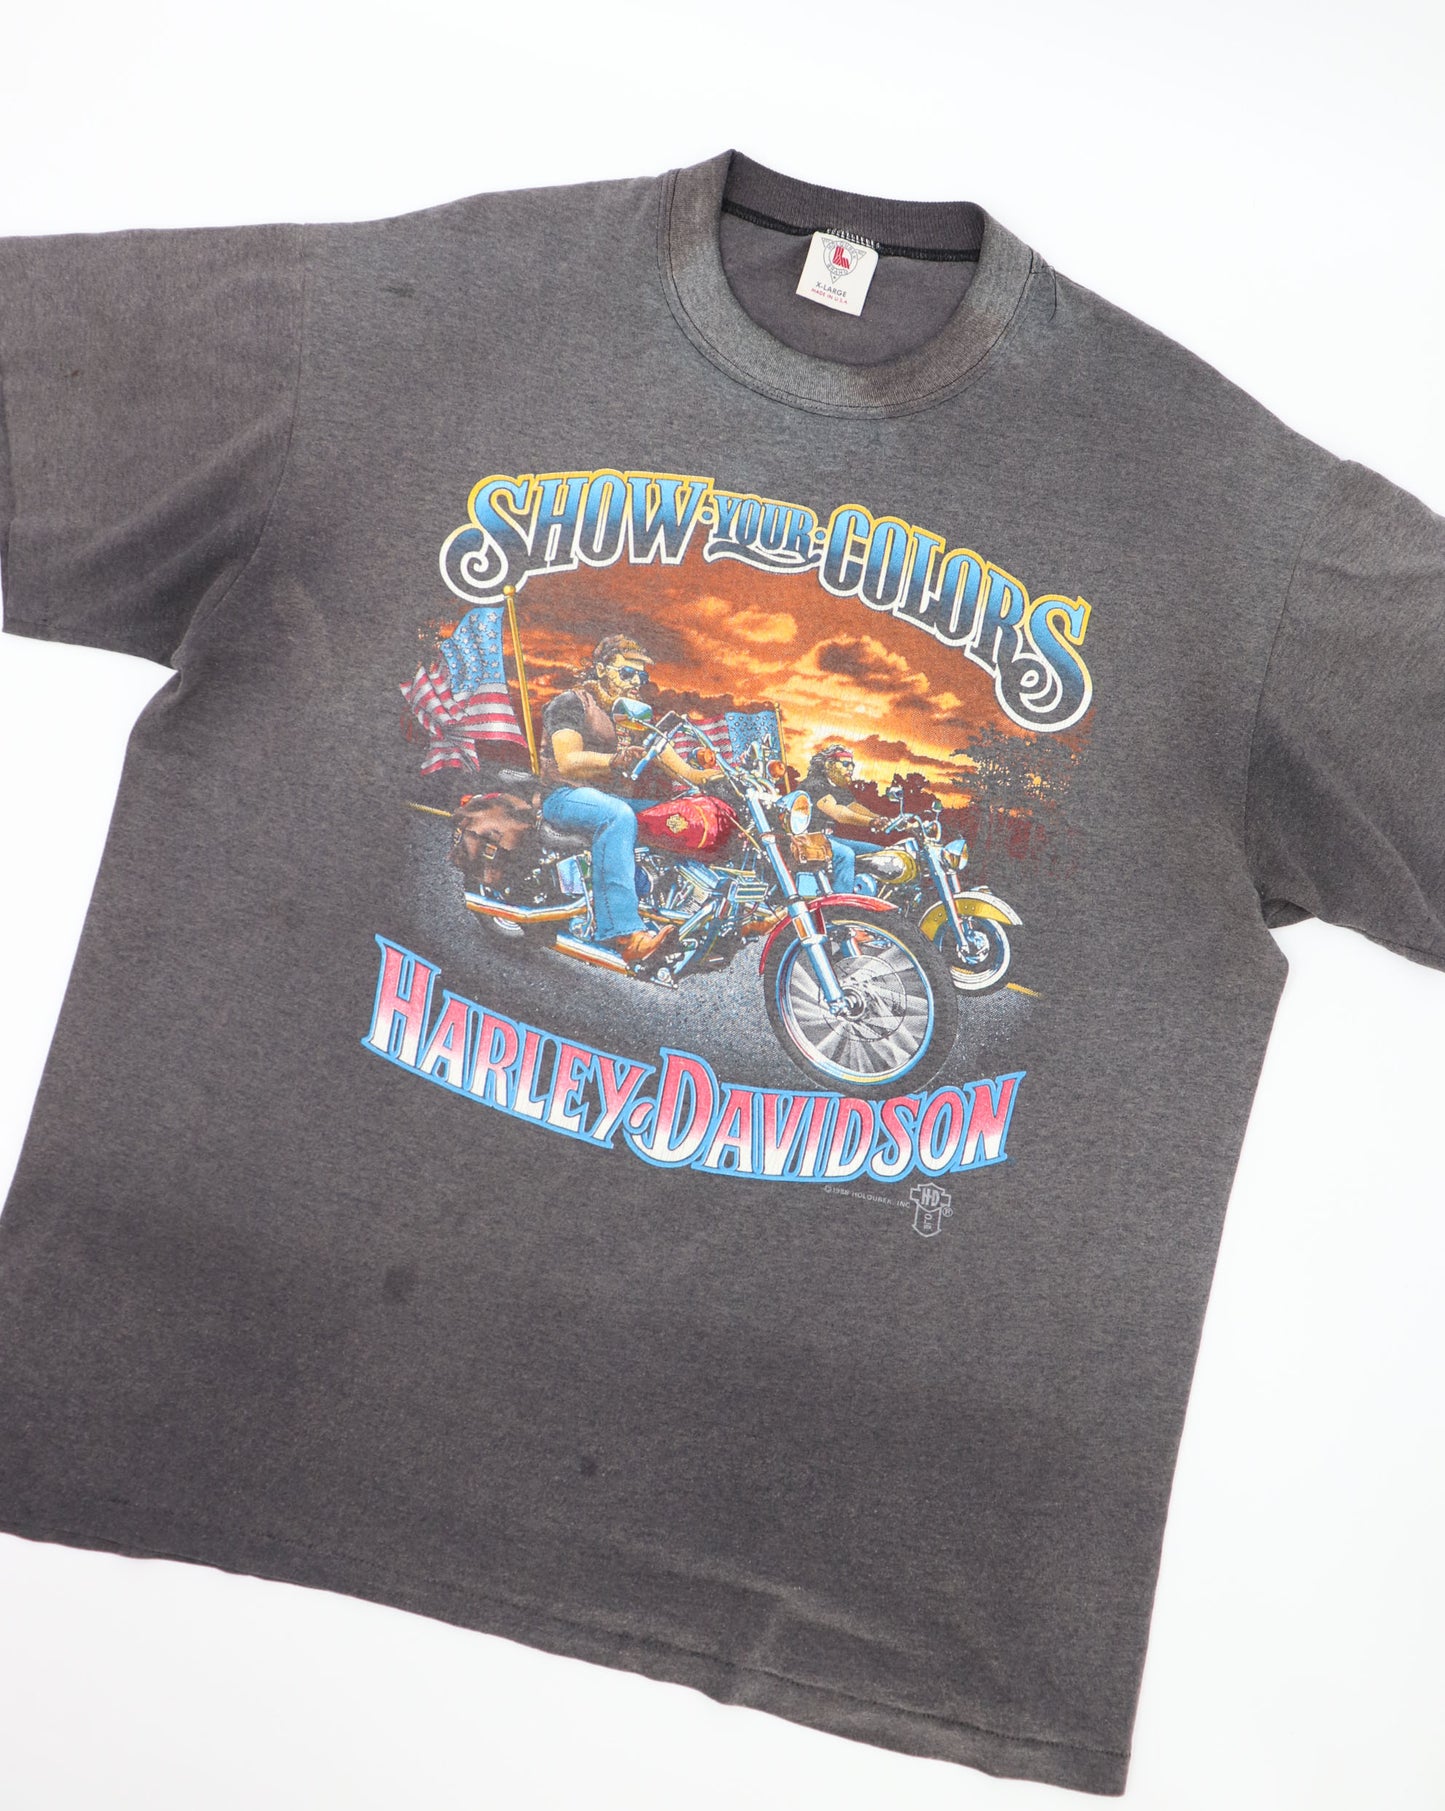 HARLEY DAVIDSON SHOW YOUR COLORS 1988 MADE IN USA